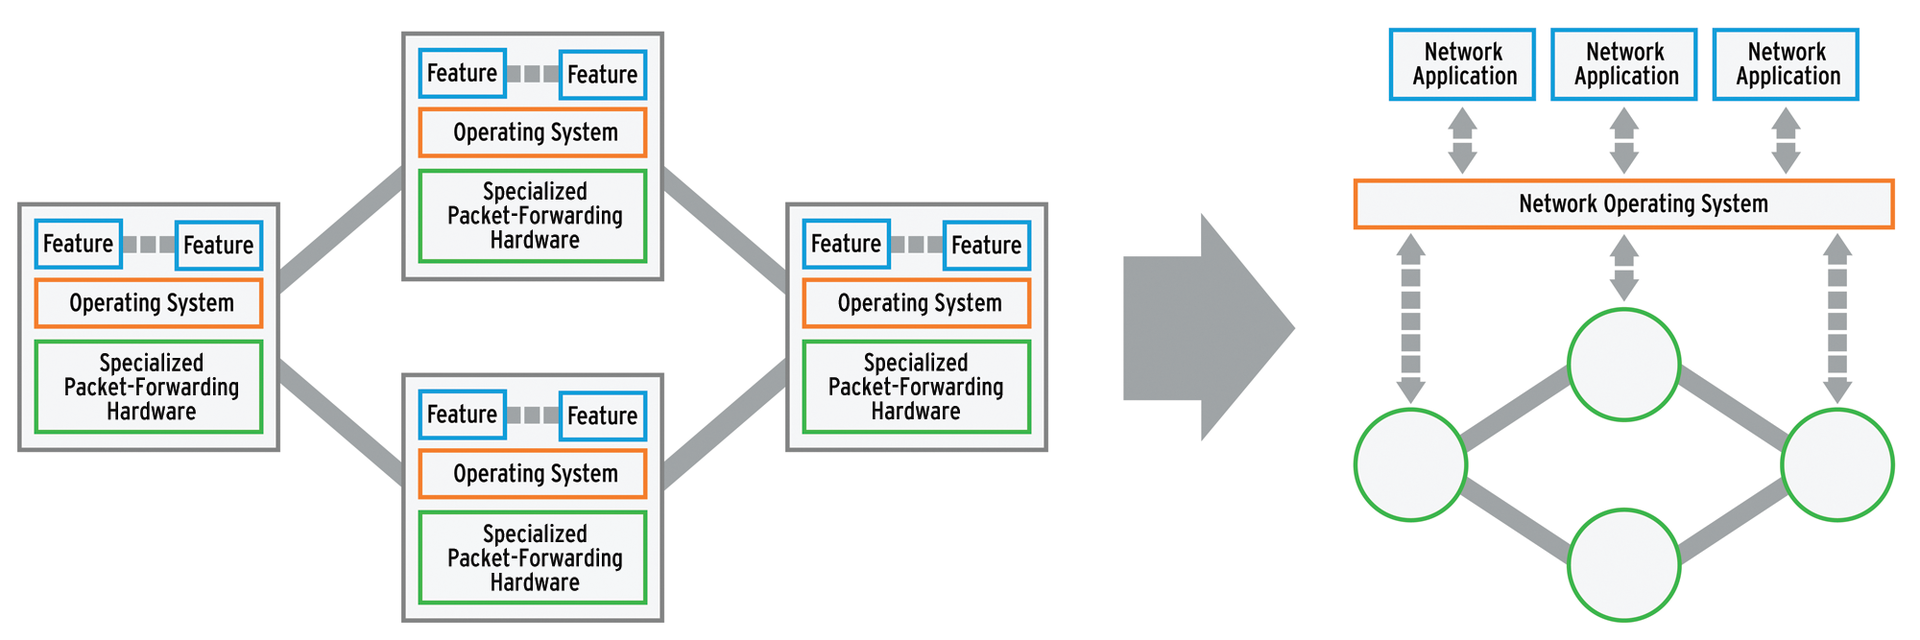 The difference between a legacy network with distributed, heterogeneous, and vertically integrated network components and an SDN using OpenFlow. 